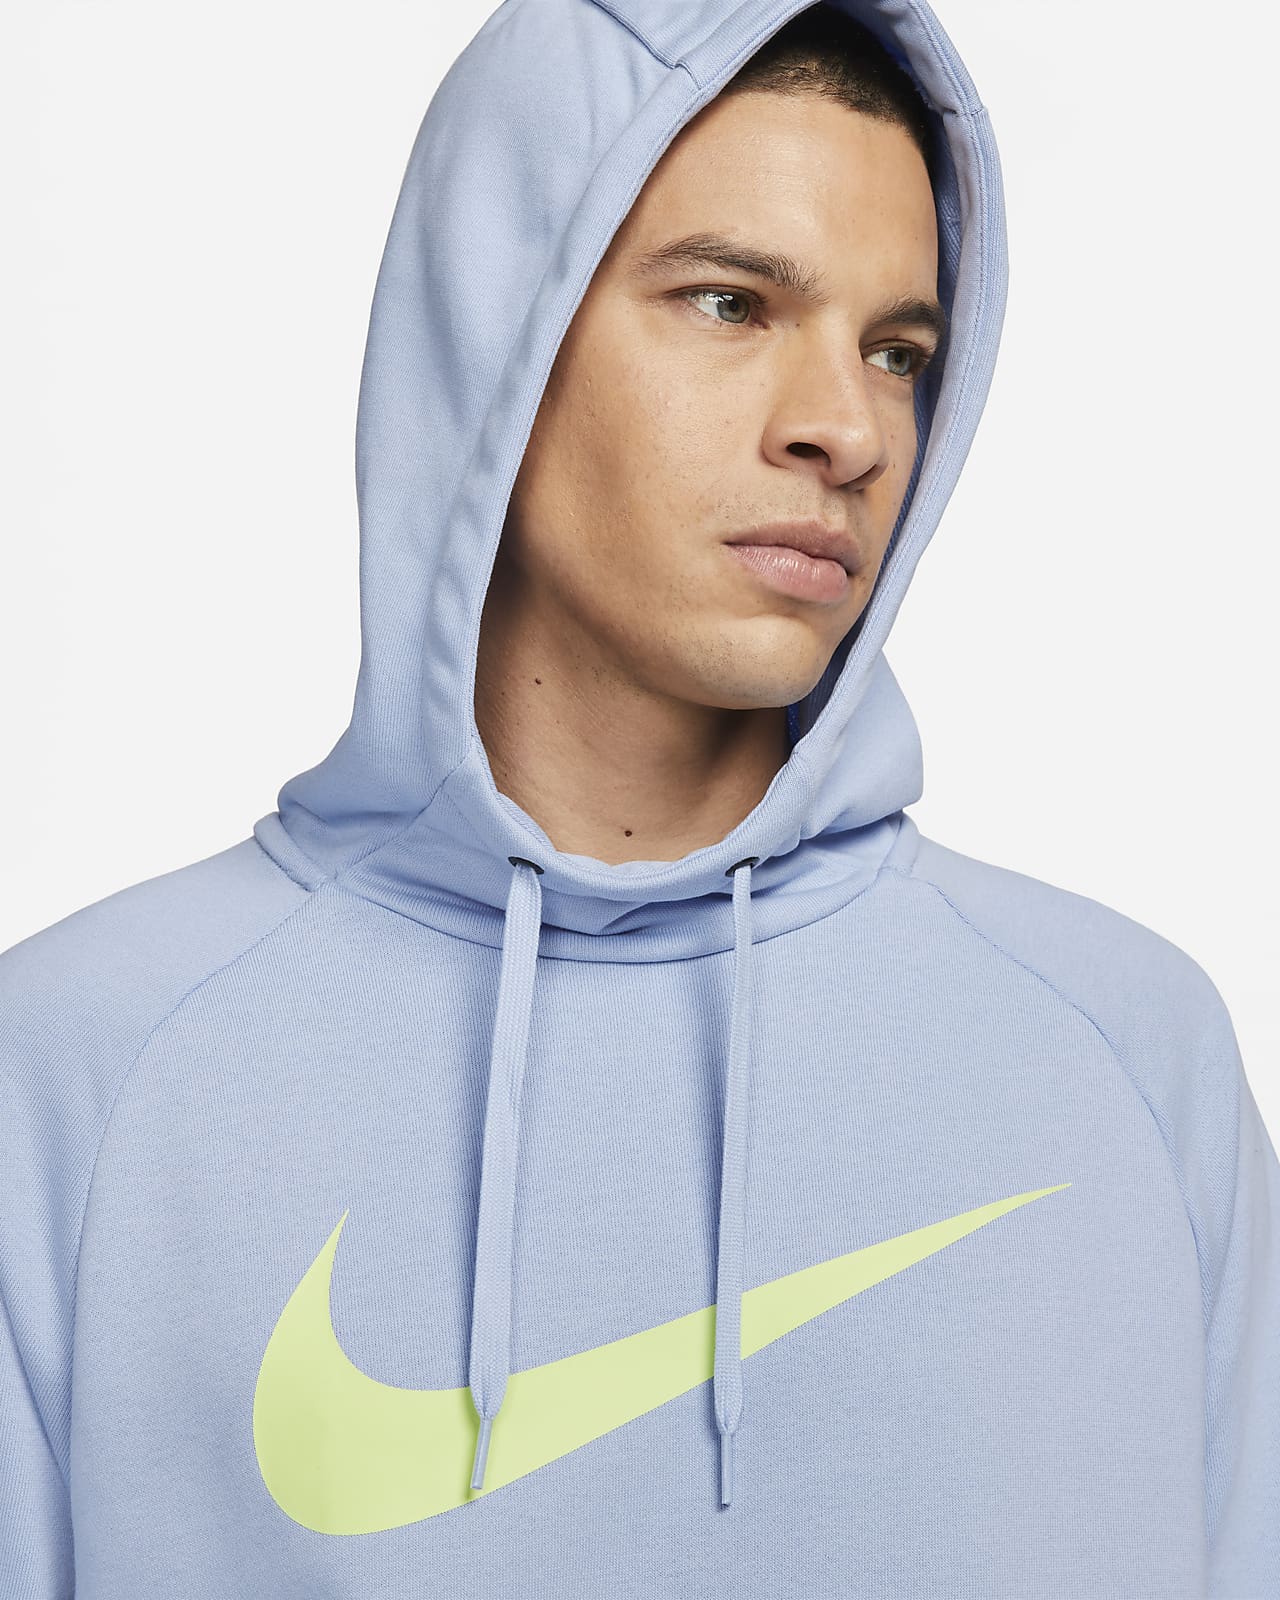 Nike Dry Graphic Men's Dri-FIT Hooded Fitness Pullover Hoodie. CA